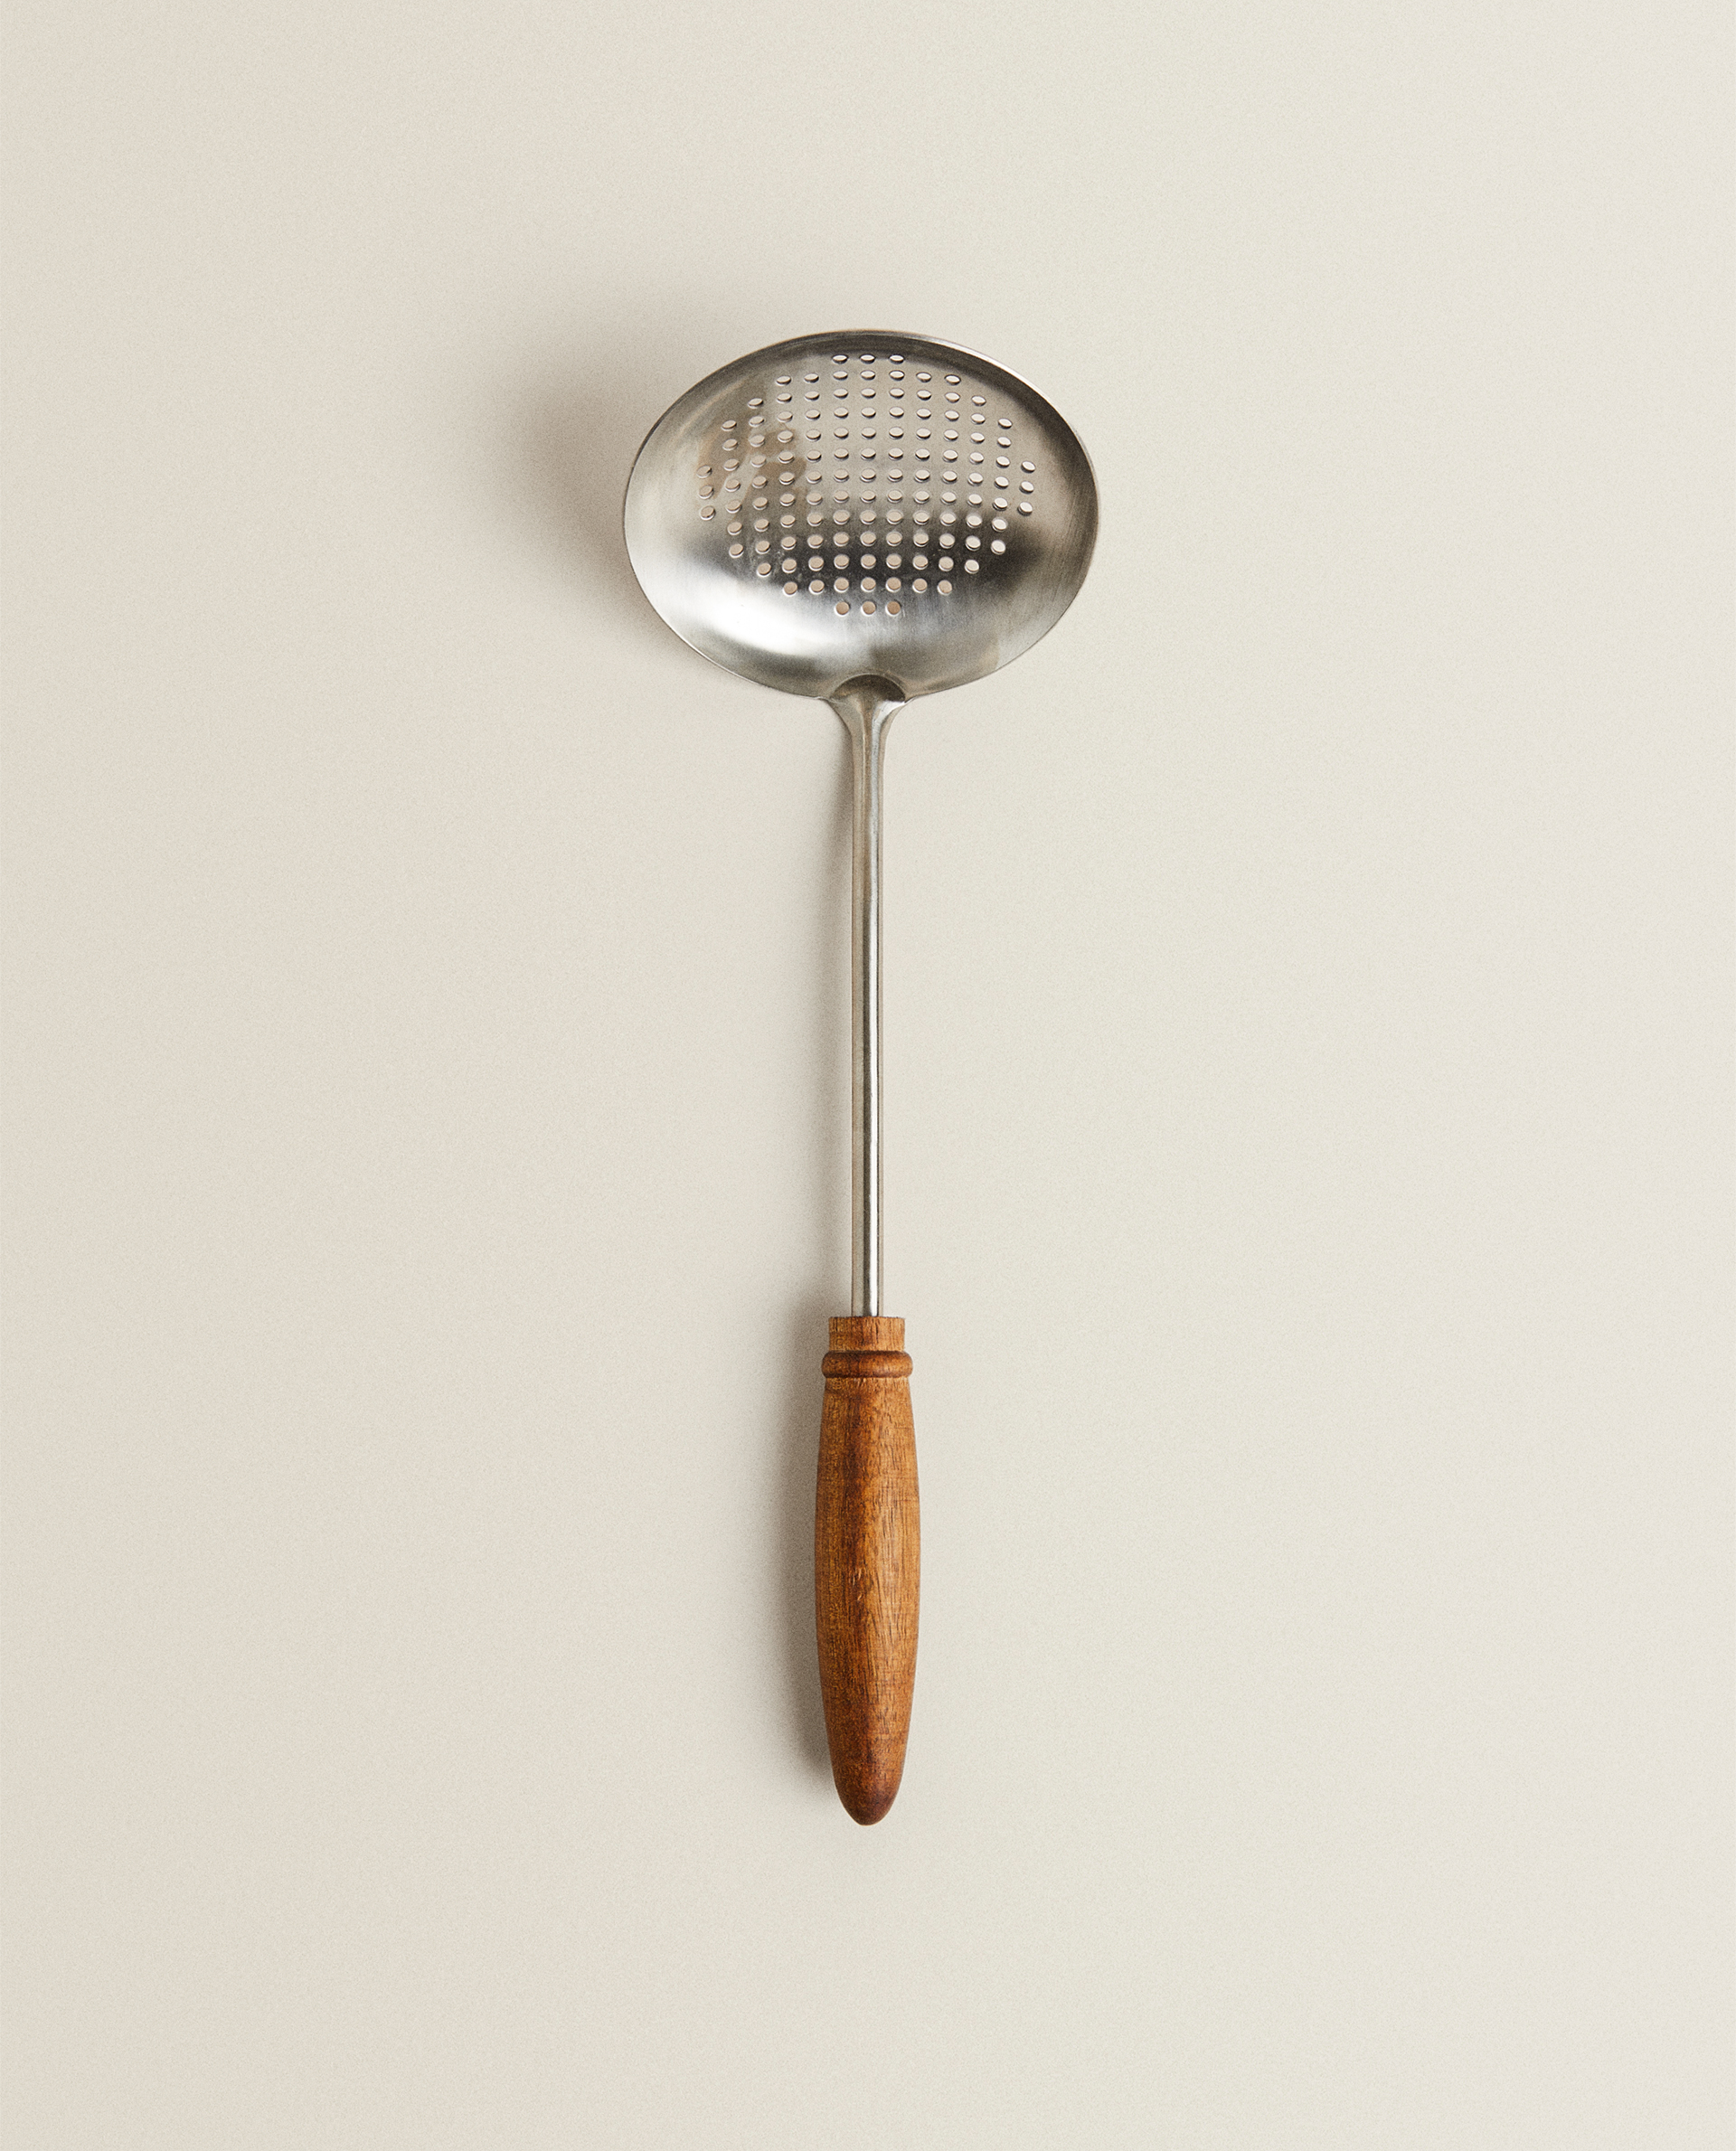 A Slotted Spoon